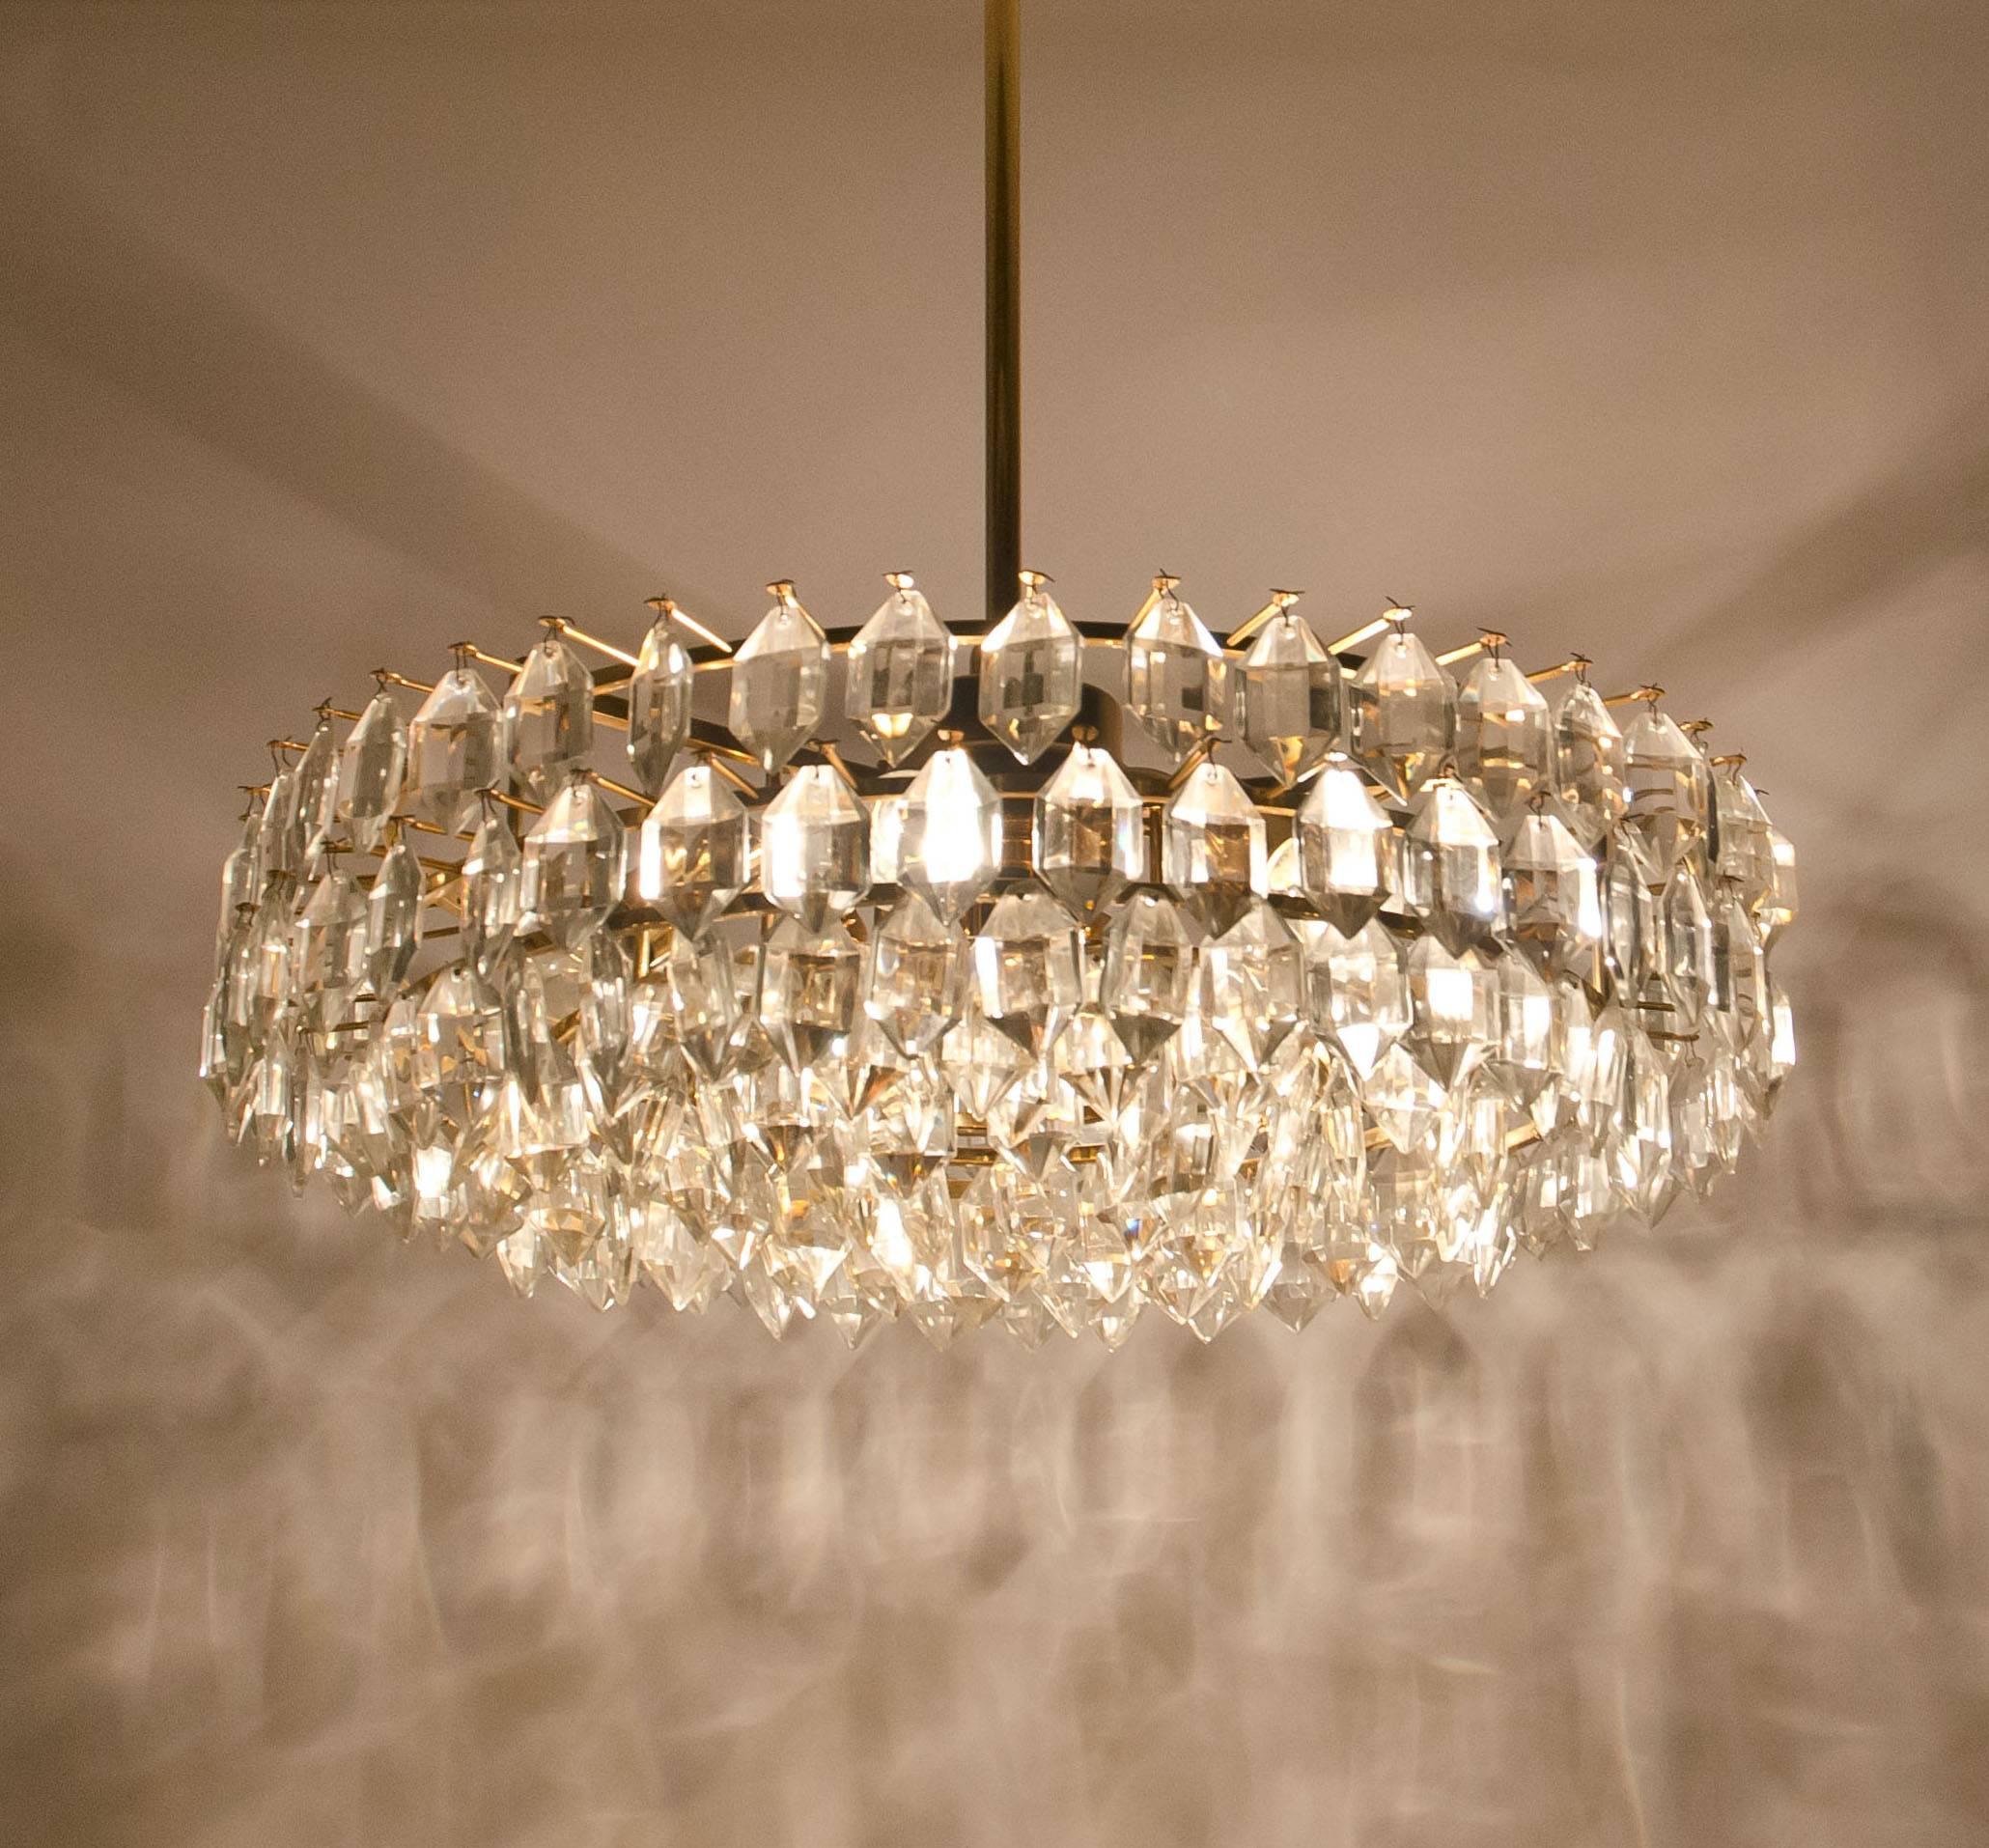 Stunning chandelier by Bakalowits and Sohne with huge gem-like crystals and brass frame. The chandelier is fitted with 6 E14 bulbs 25 watts each. Best of design from the 1950s From Vienna, Austria. The chandeliers from Bakalowits are executed to a